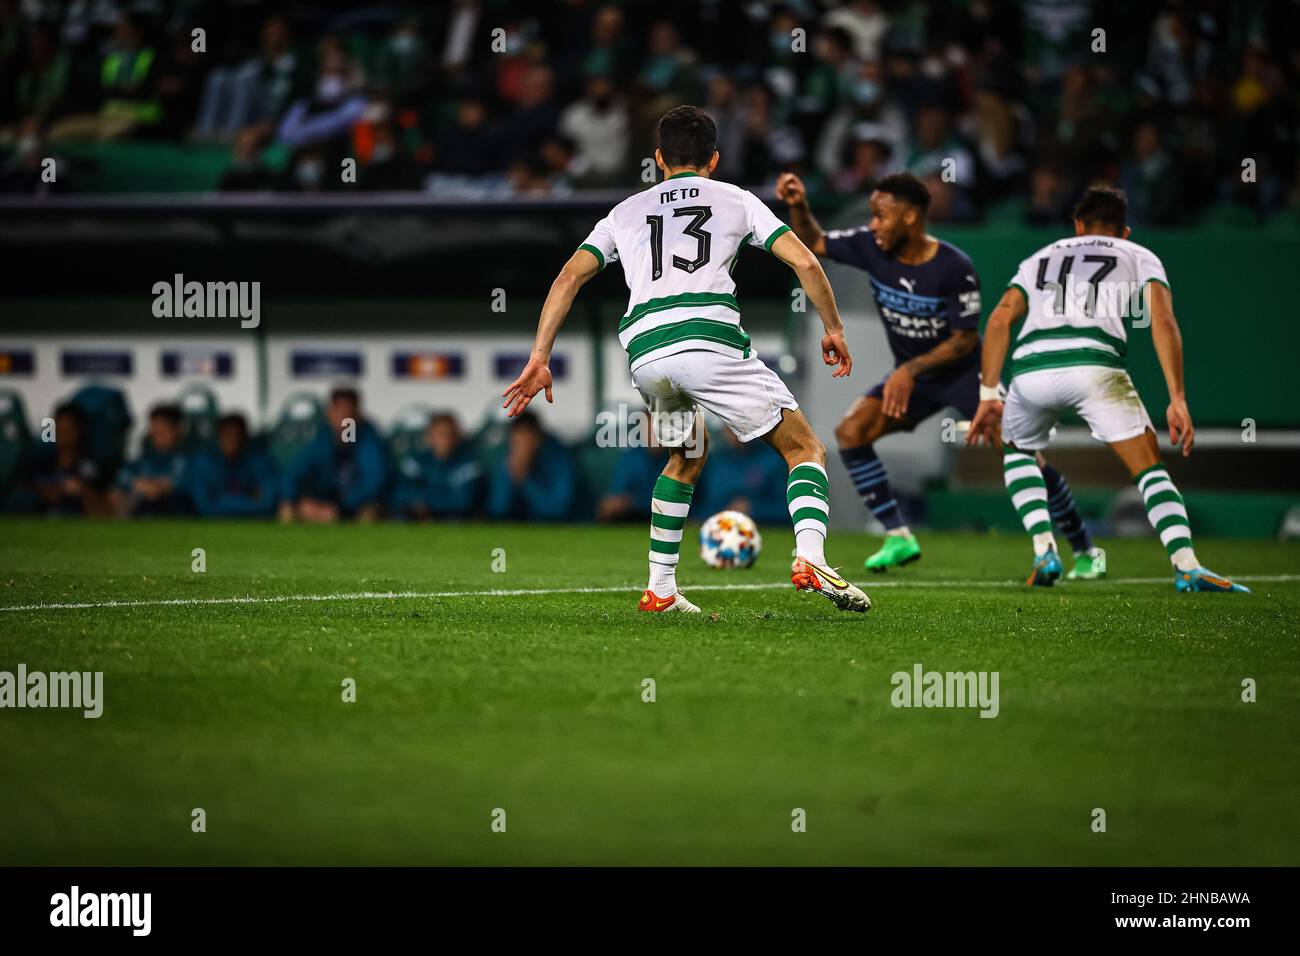 Lisbon, Portugal. 15th Feb, 2022. Lisbon, Portugal, Feb 15th 2022 LUIS NETO OF SPORTING during the UEFA Champions League game between Sporting Lisbon and Manchester City at the Estadio Jose Alvalade in Lisbon Portugal Pedro Loureiro/SPP Credit: SPP Sport Press Photo. /Alamy Live News Stock Photo